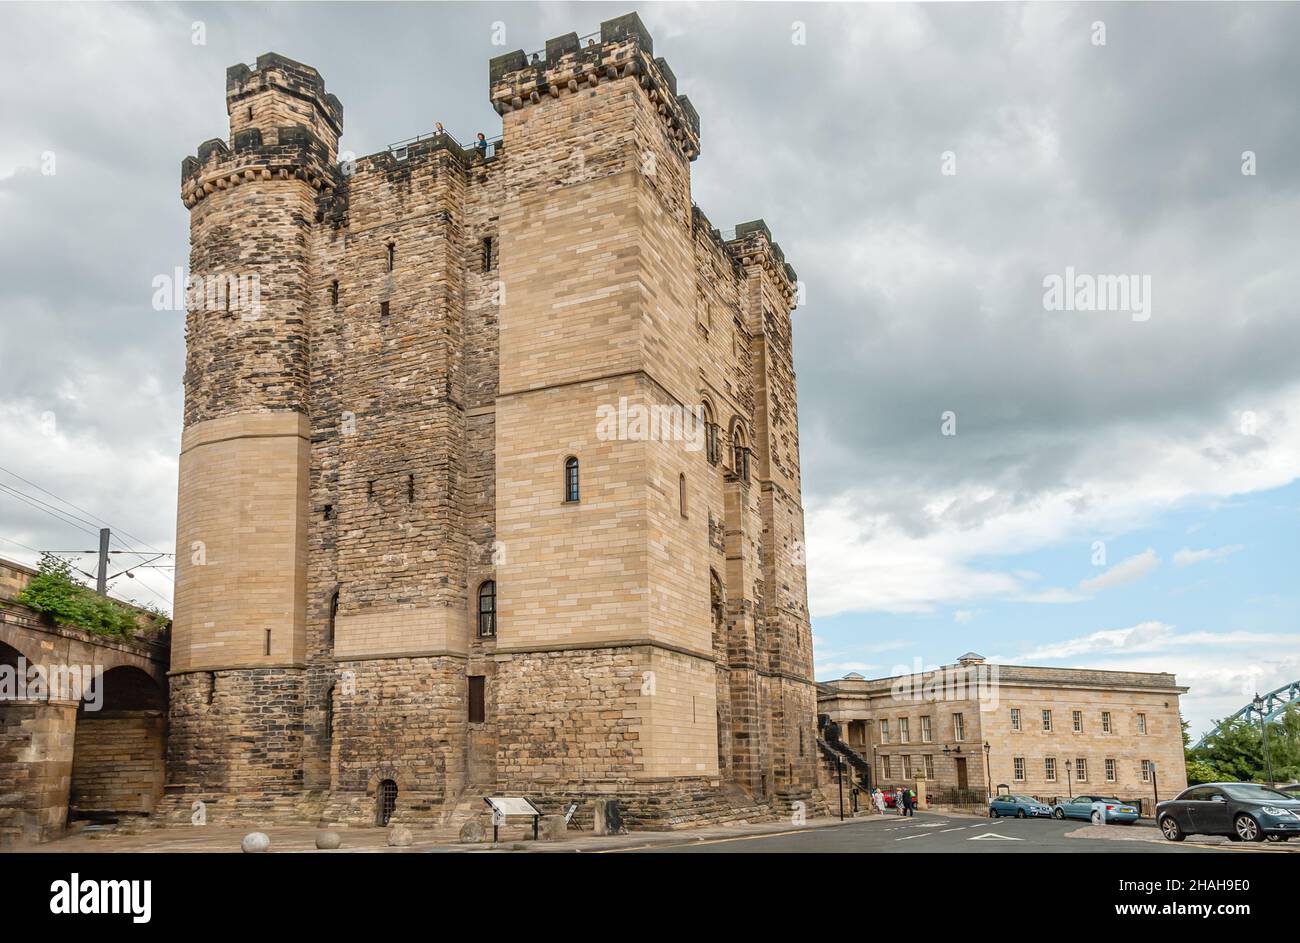 Castle Keep, fortified stone tower of the former Newcastle Castle, England, UK Stock Photo